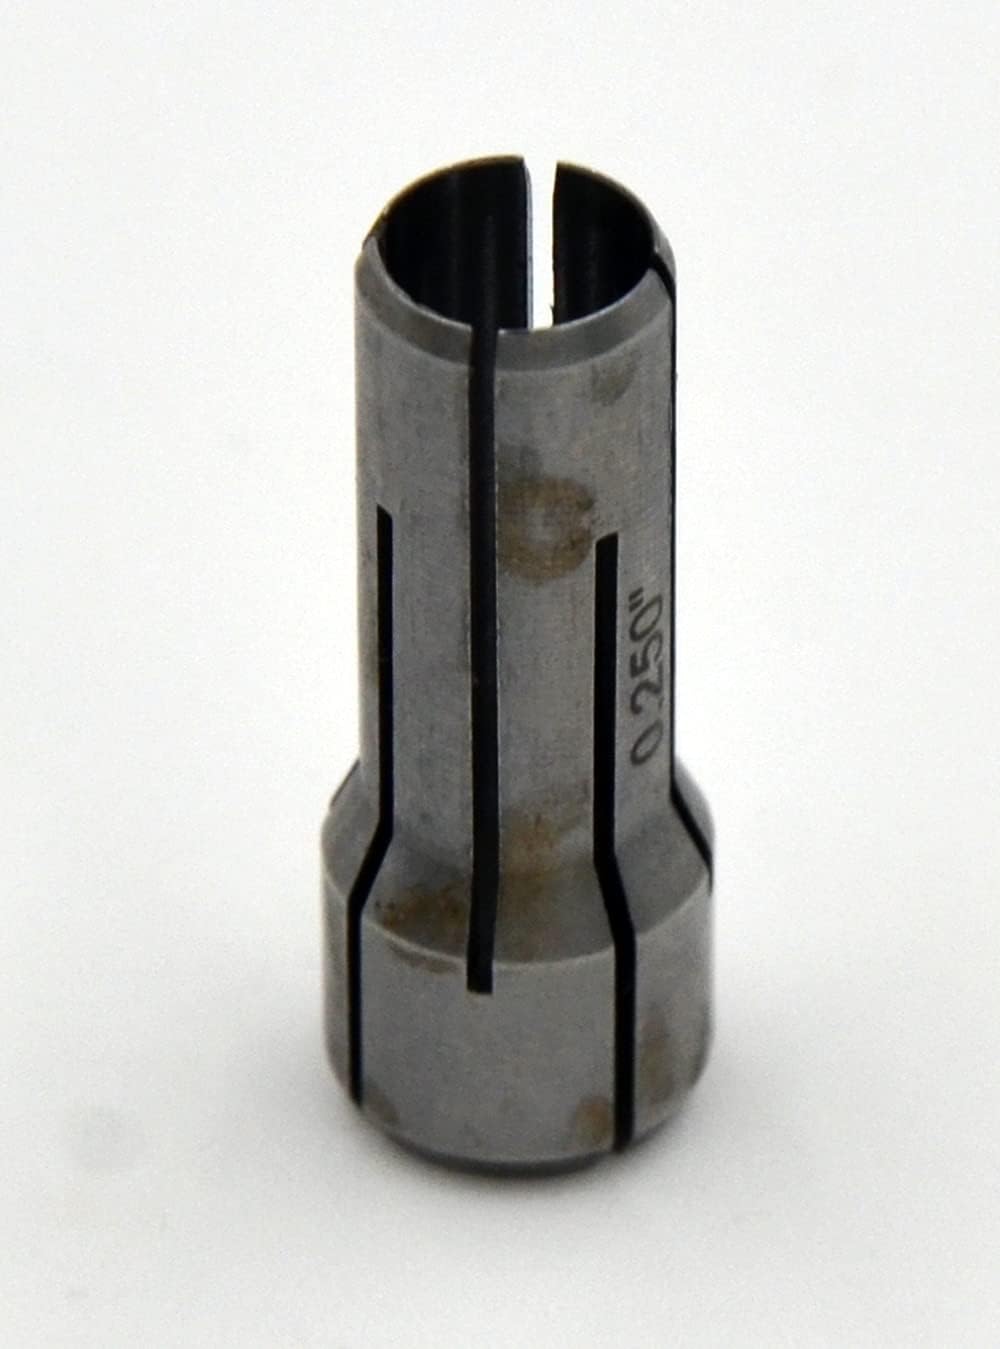 Ingersoll Rand Power Tools Part Number DG110-700-G4 - Collet for Ingersoll Rand 325XC4A Die Grinder